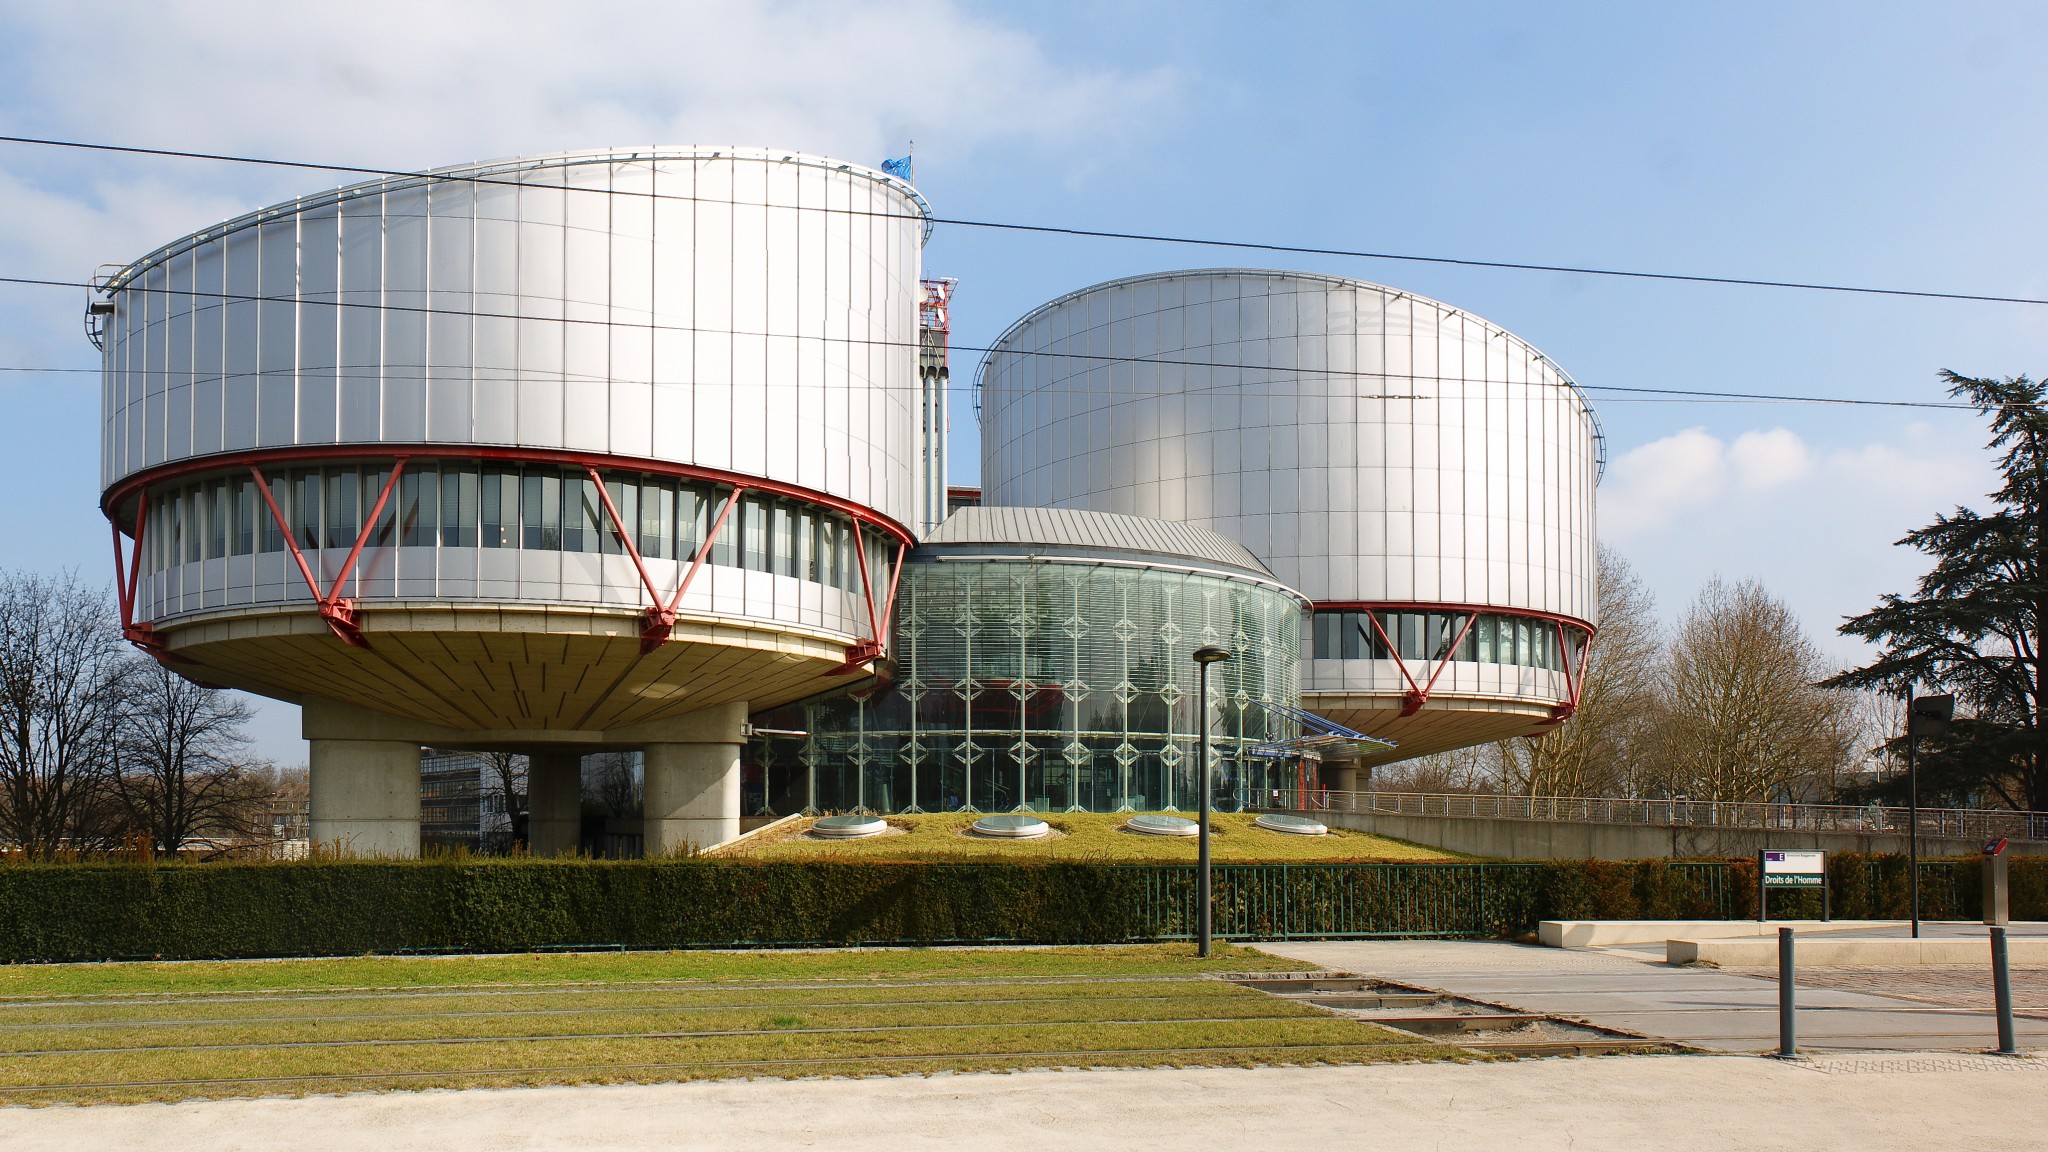 European Court of Human Rights ruled Russia responsible for actions of Transnistria